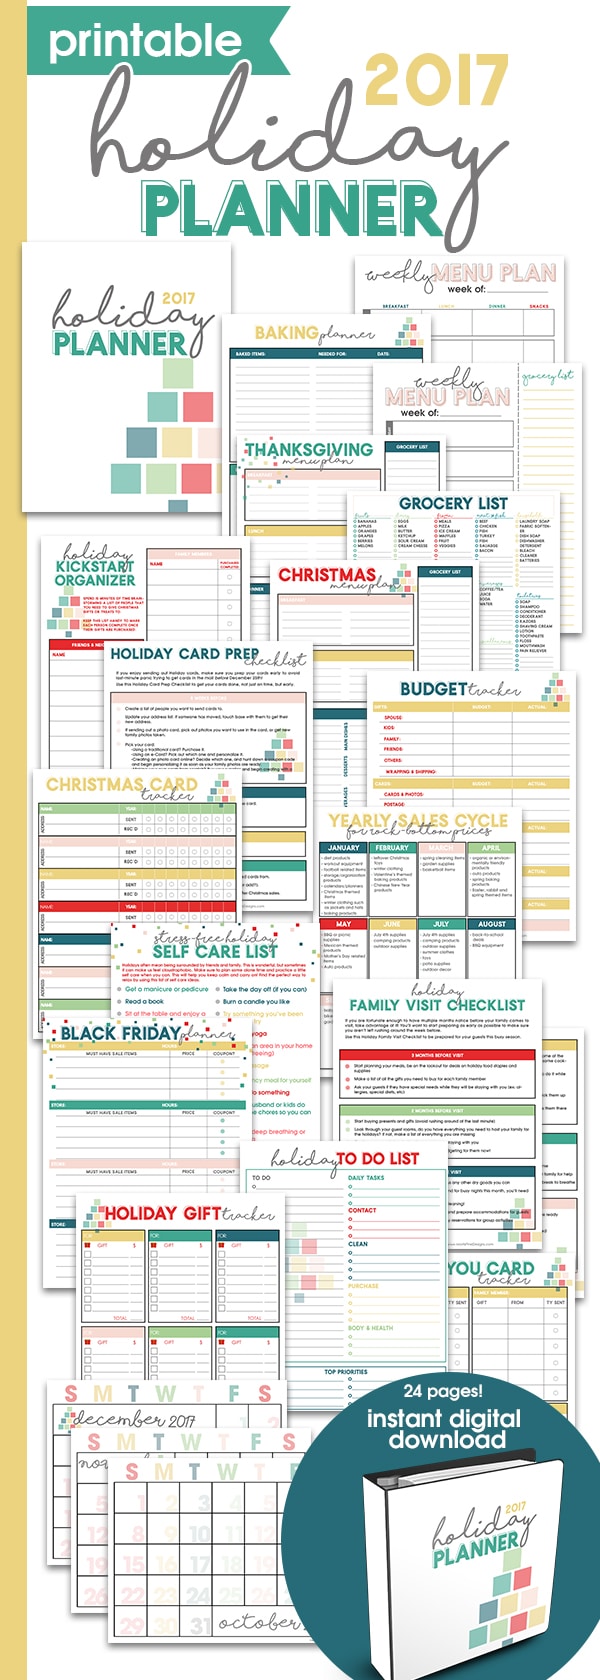 Printable Holiday Planner | Thanksgiving & Christmas Organizer | Holiday Checklists | Holiday Guide for Menu Planning, Budgeting, Gift Buying & more